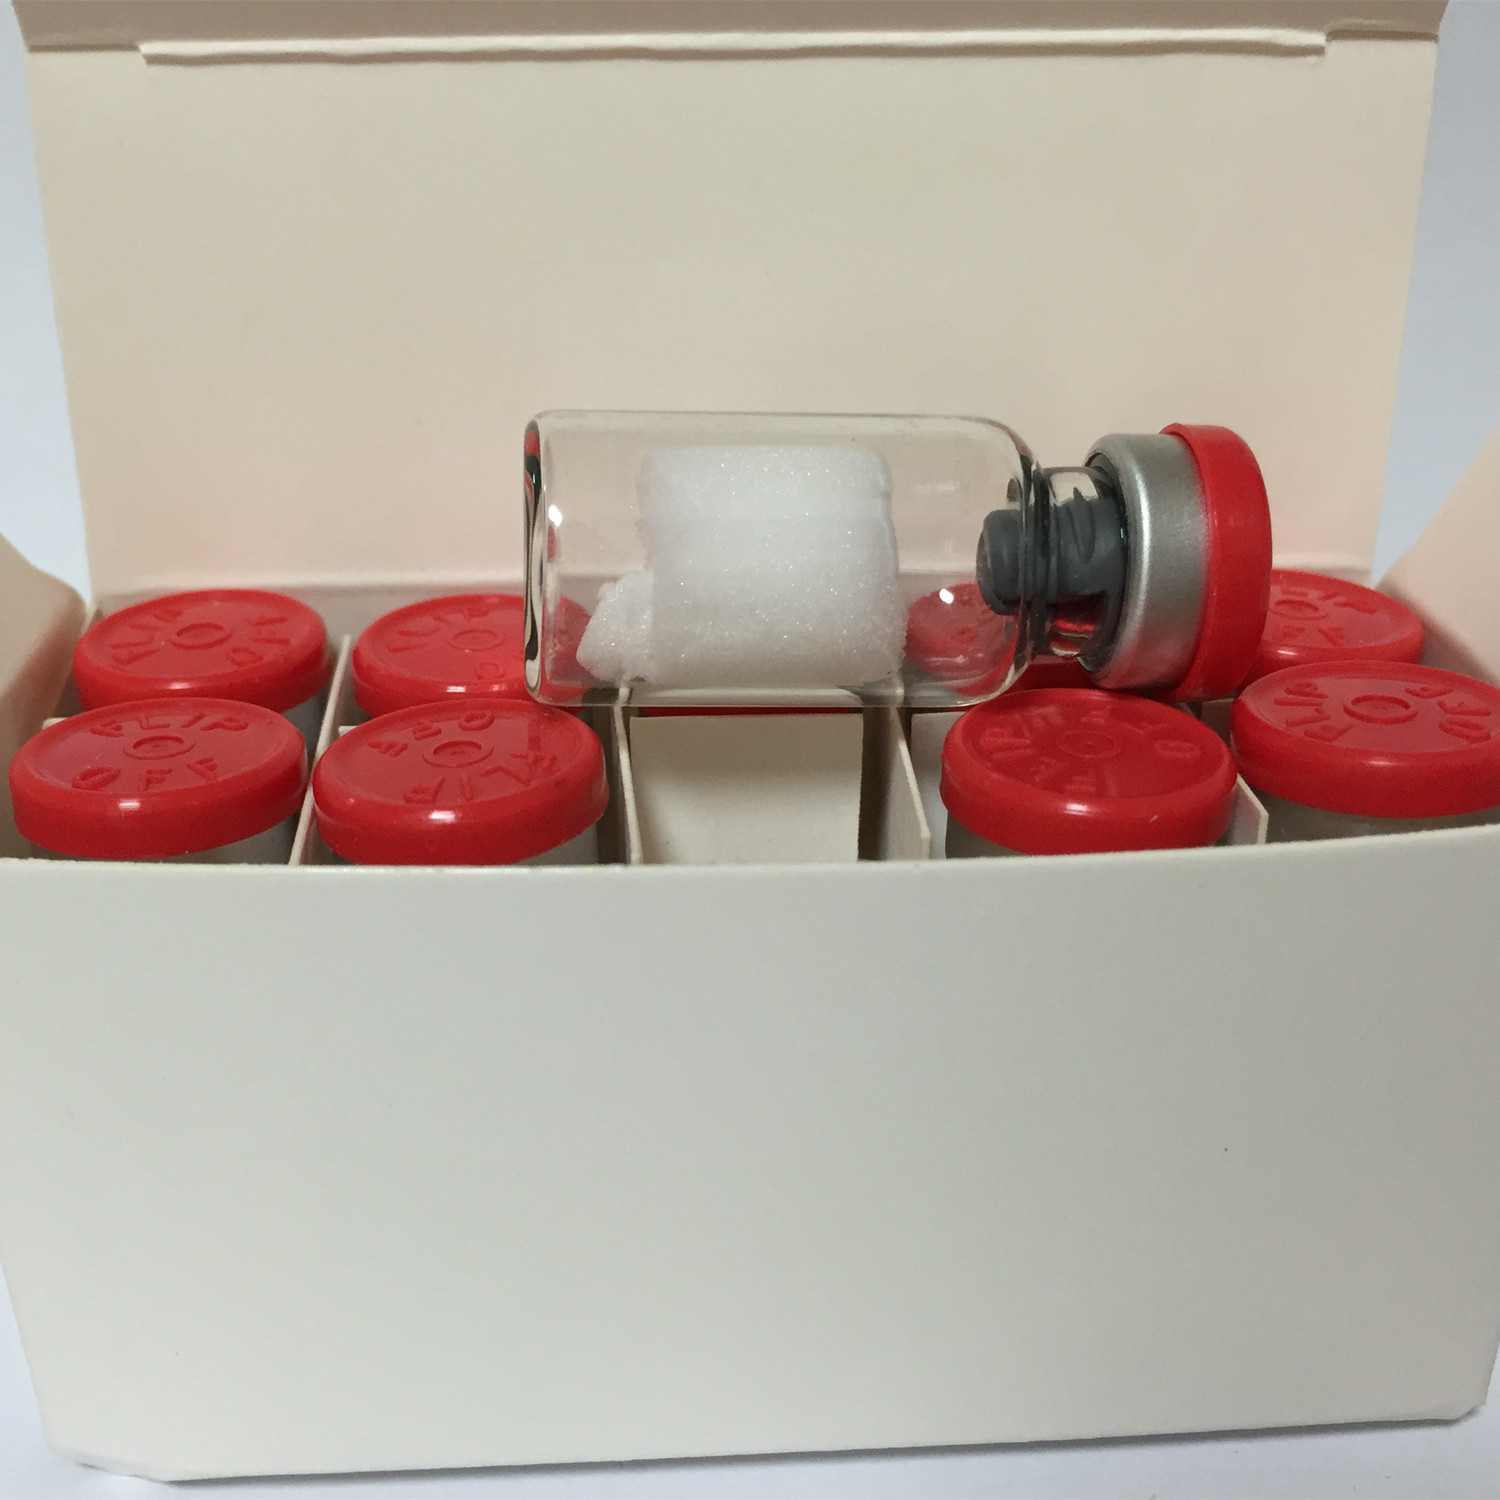 High purity Peptides High Quality Dermorphin 5mg/Vial